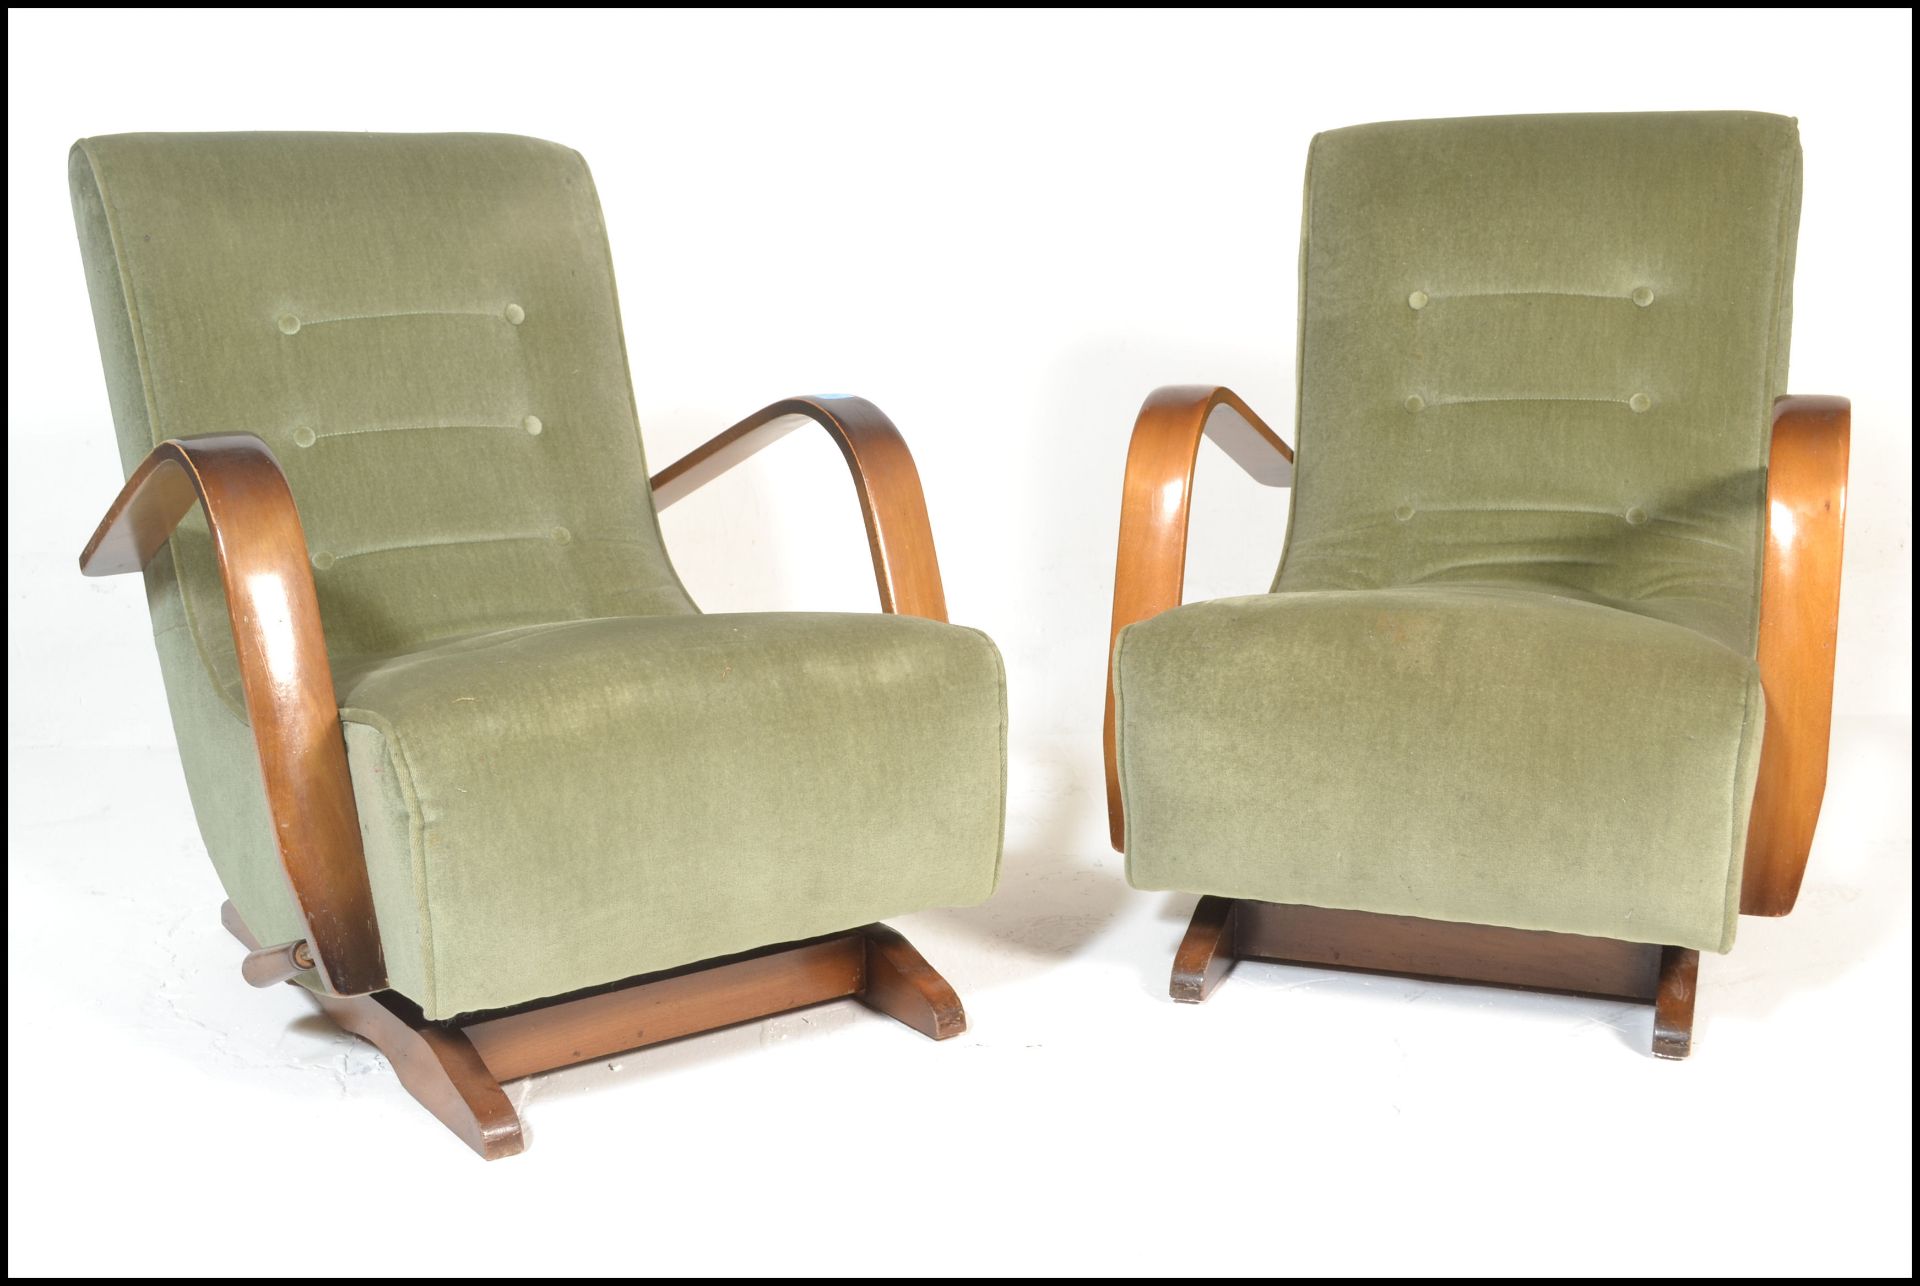 A pair of early 20th century, circa 1940's bentwood rocking chairs - armchairs. Raised on beech wood